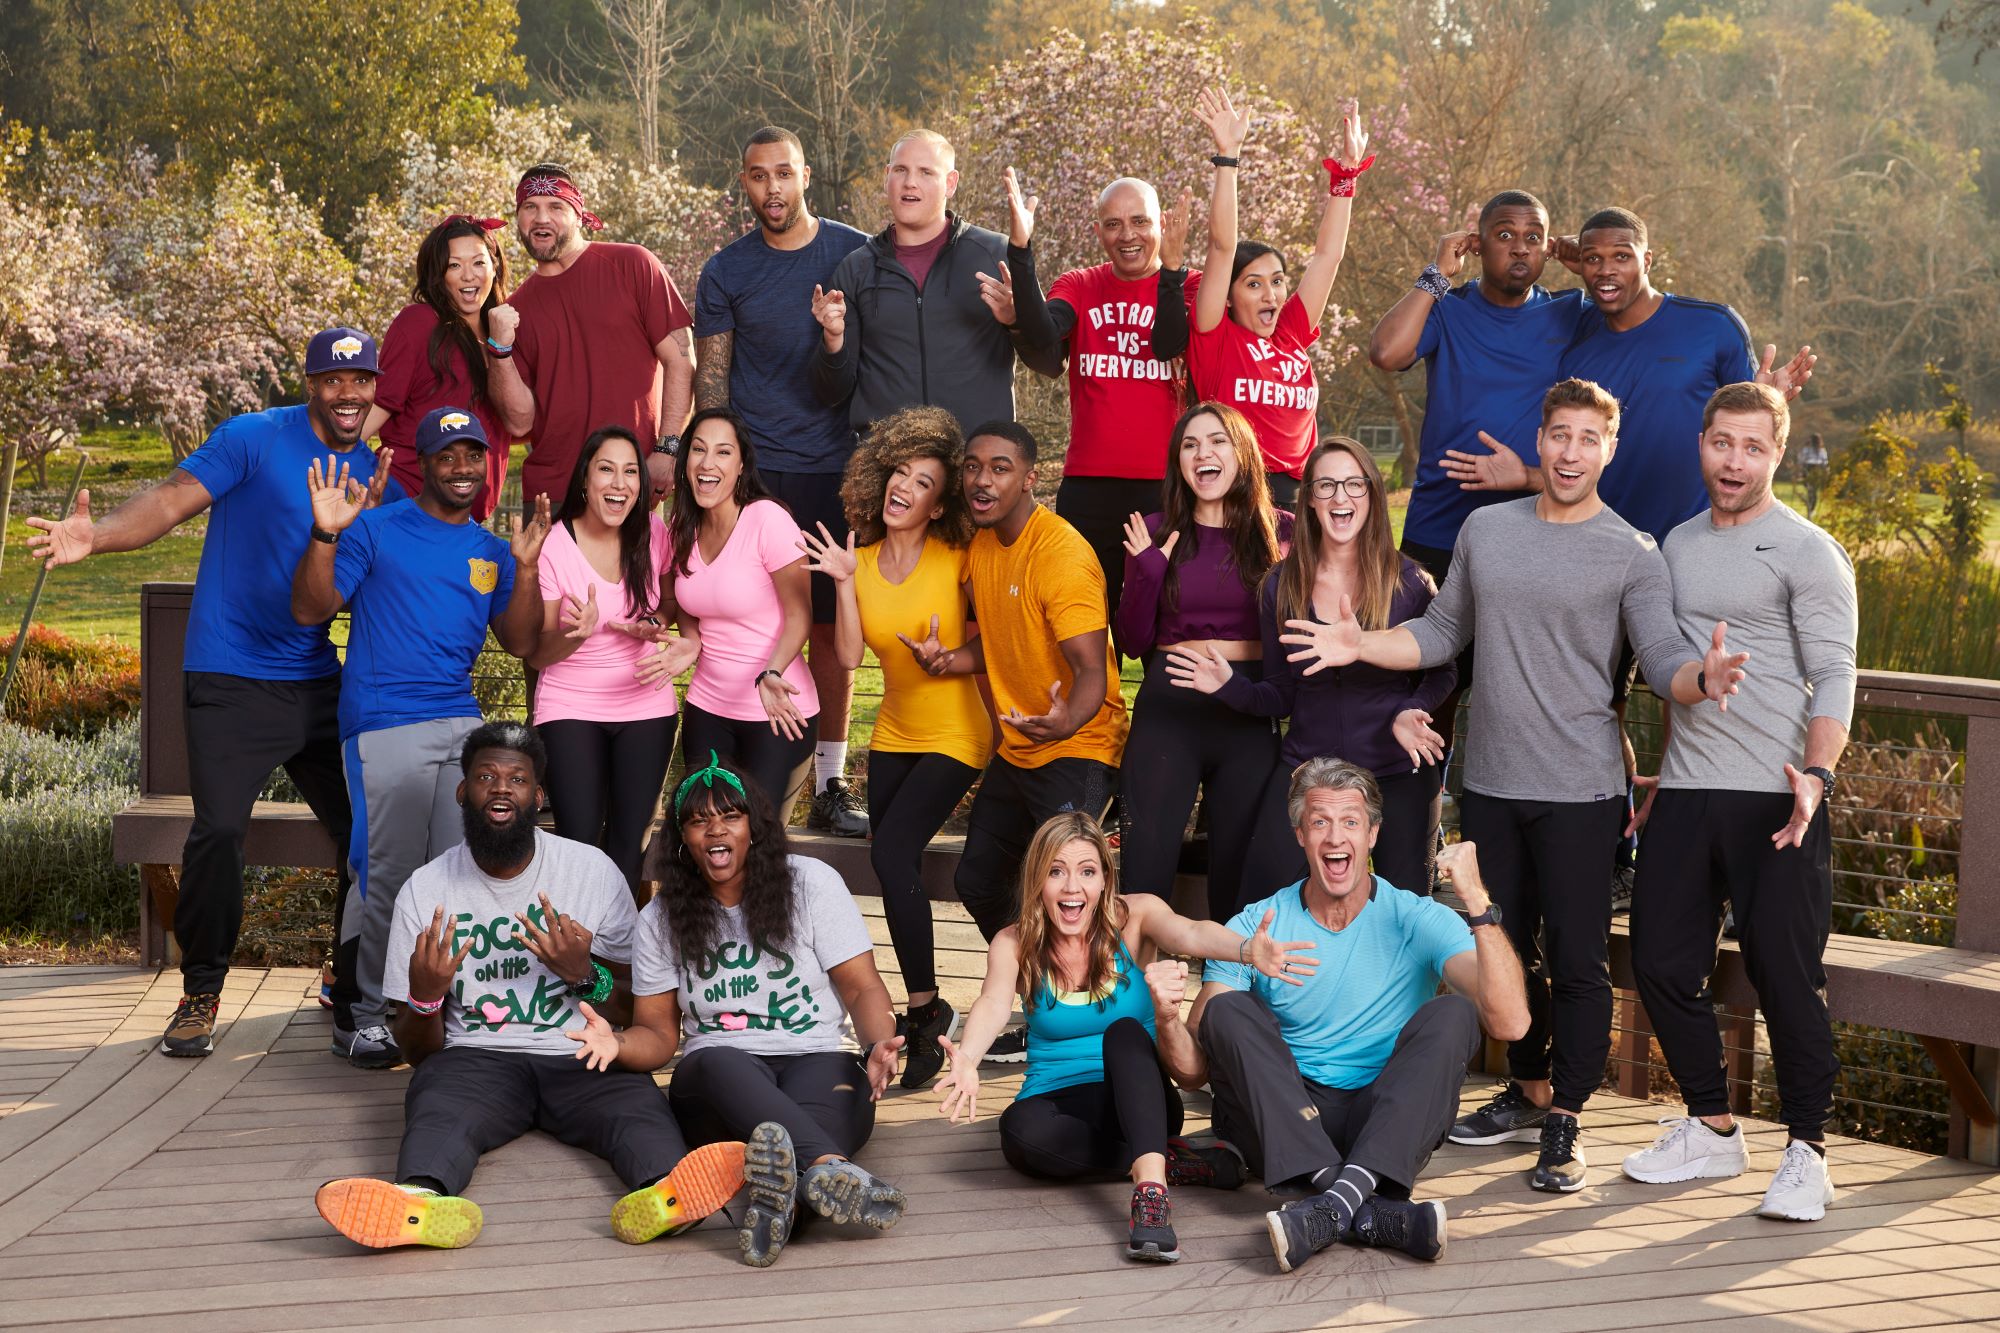 'The Amazing Race' Season 33 cast, including Connie and Sam Greiner, Anthony Sadler and Spencer Stone, Arun and Natalia Kumar, Taylor and Isaiah Green-Jones, Michael Norwood and Moe Badger, Lulu and Lala Gonzalez, Caro Viehweg and Ray Gantt, Raquel Moore and Cayla Platt, Ryan Ferguson and Dusty Harris, Akbar and Sheri Cook, Kim and Penn Holderness, pose for promotional photos before the season premiere and finale.